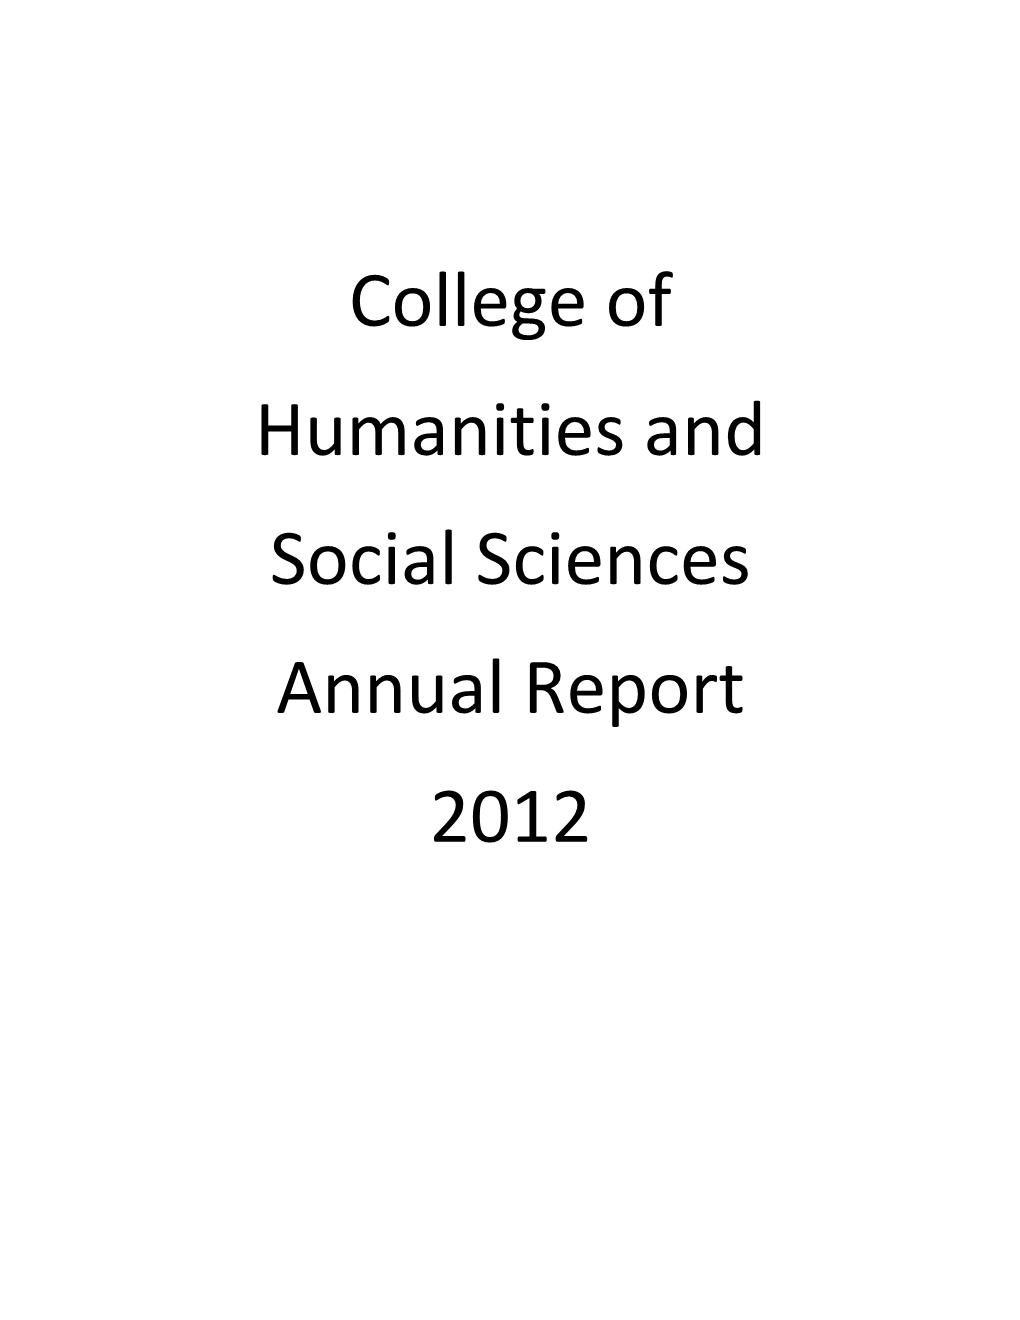 College of Humanities and Social Sciences Annual Report 2012